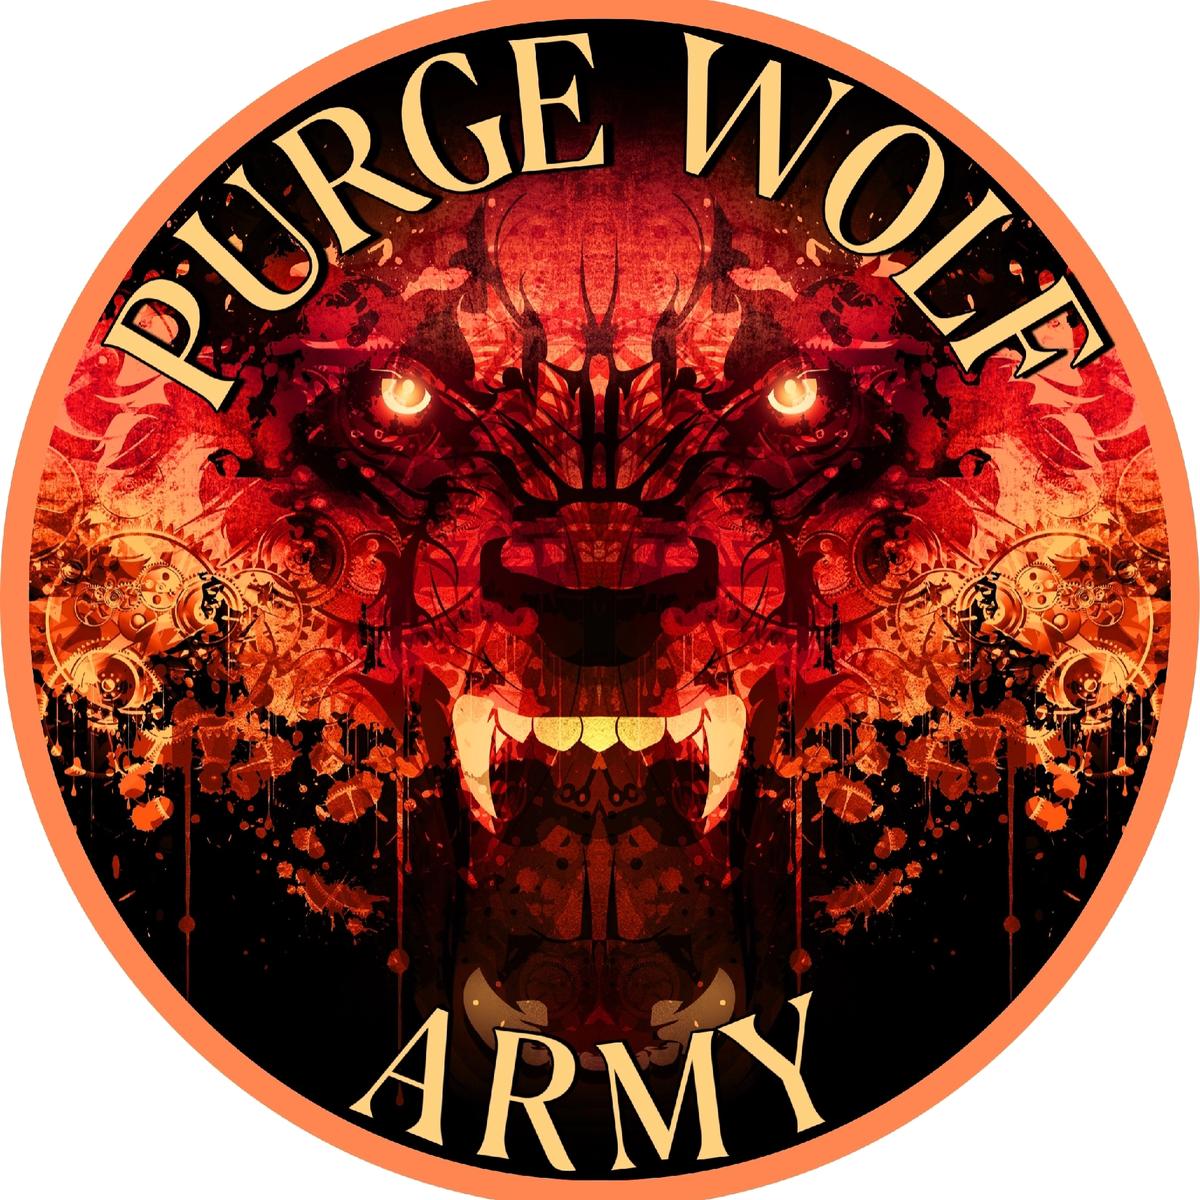 purge_wolf⚔️360's images